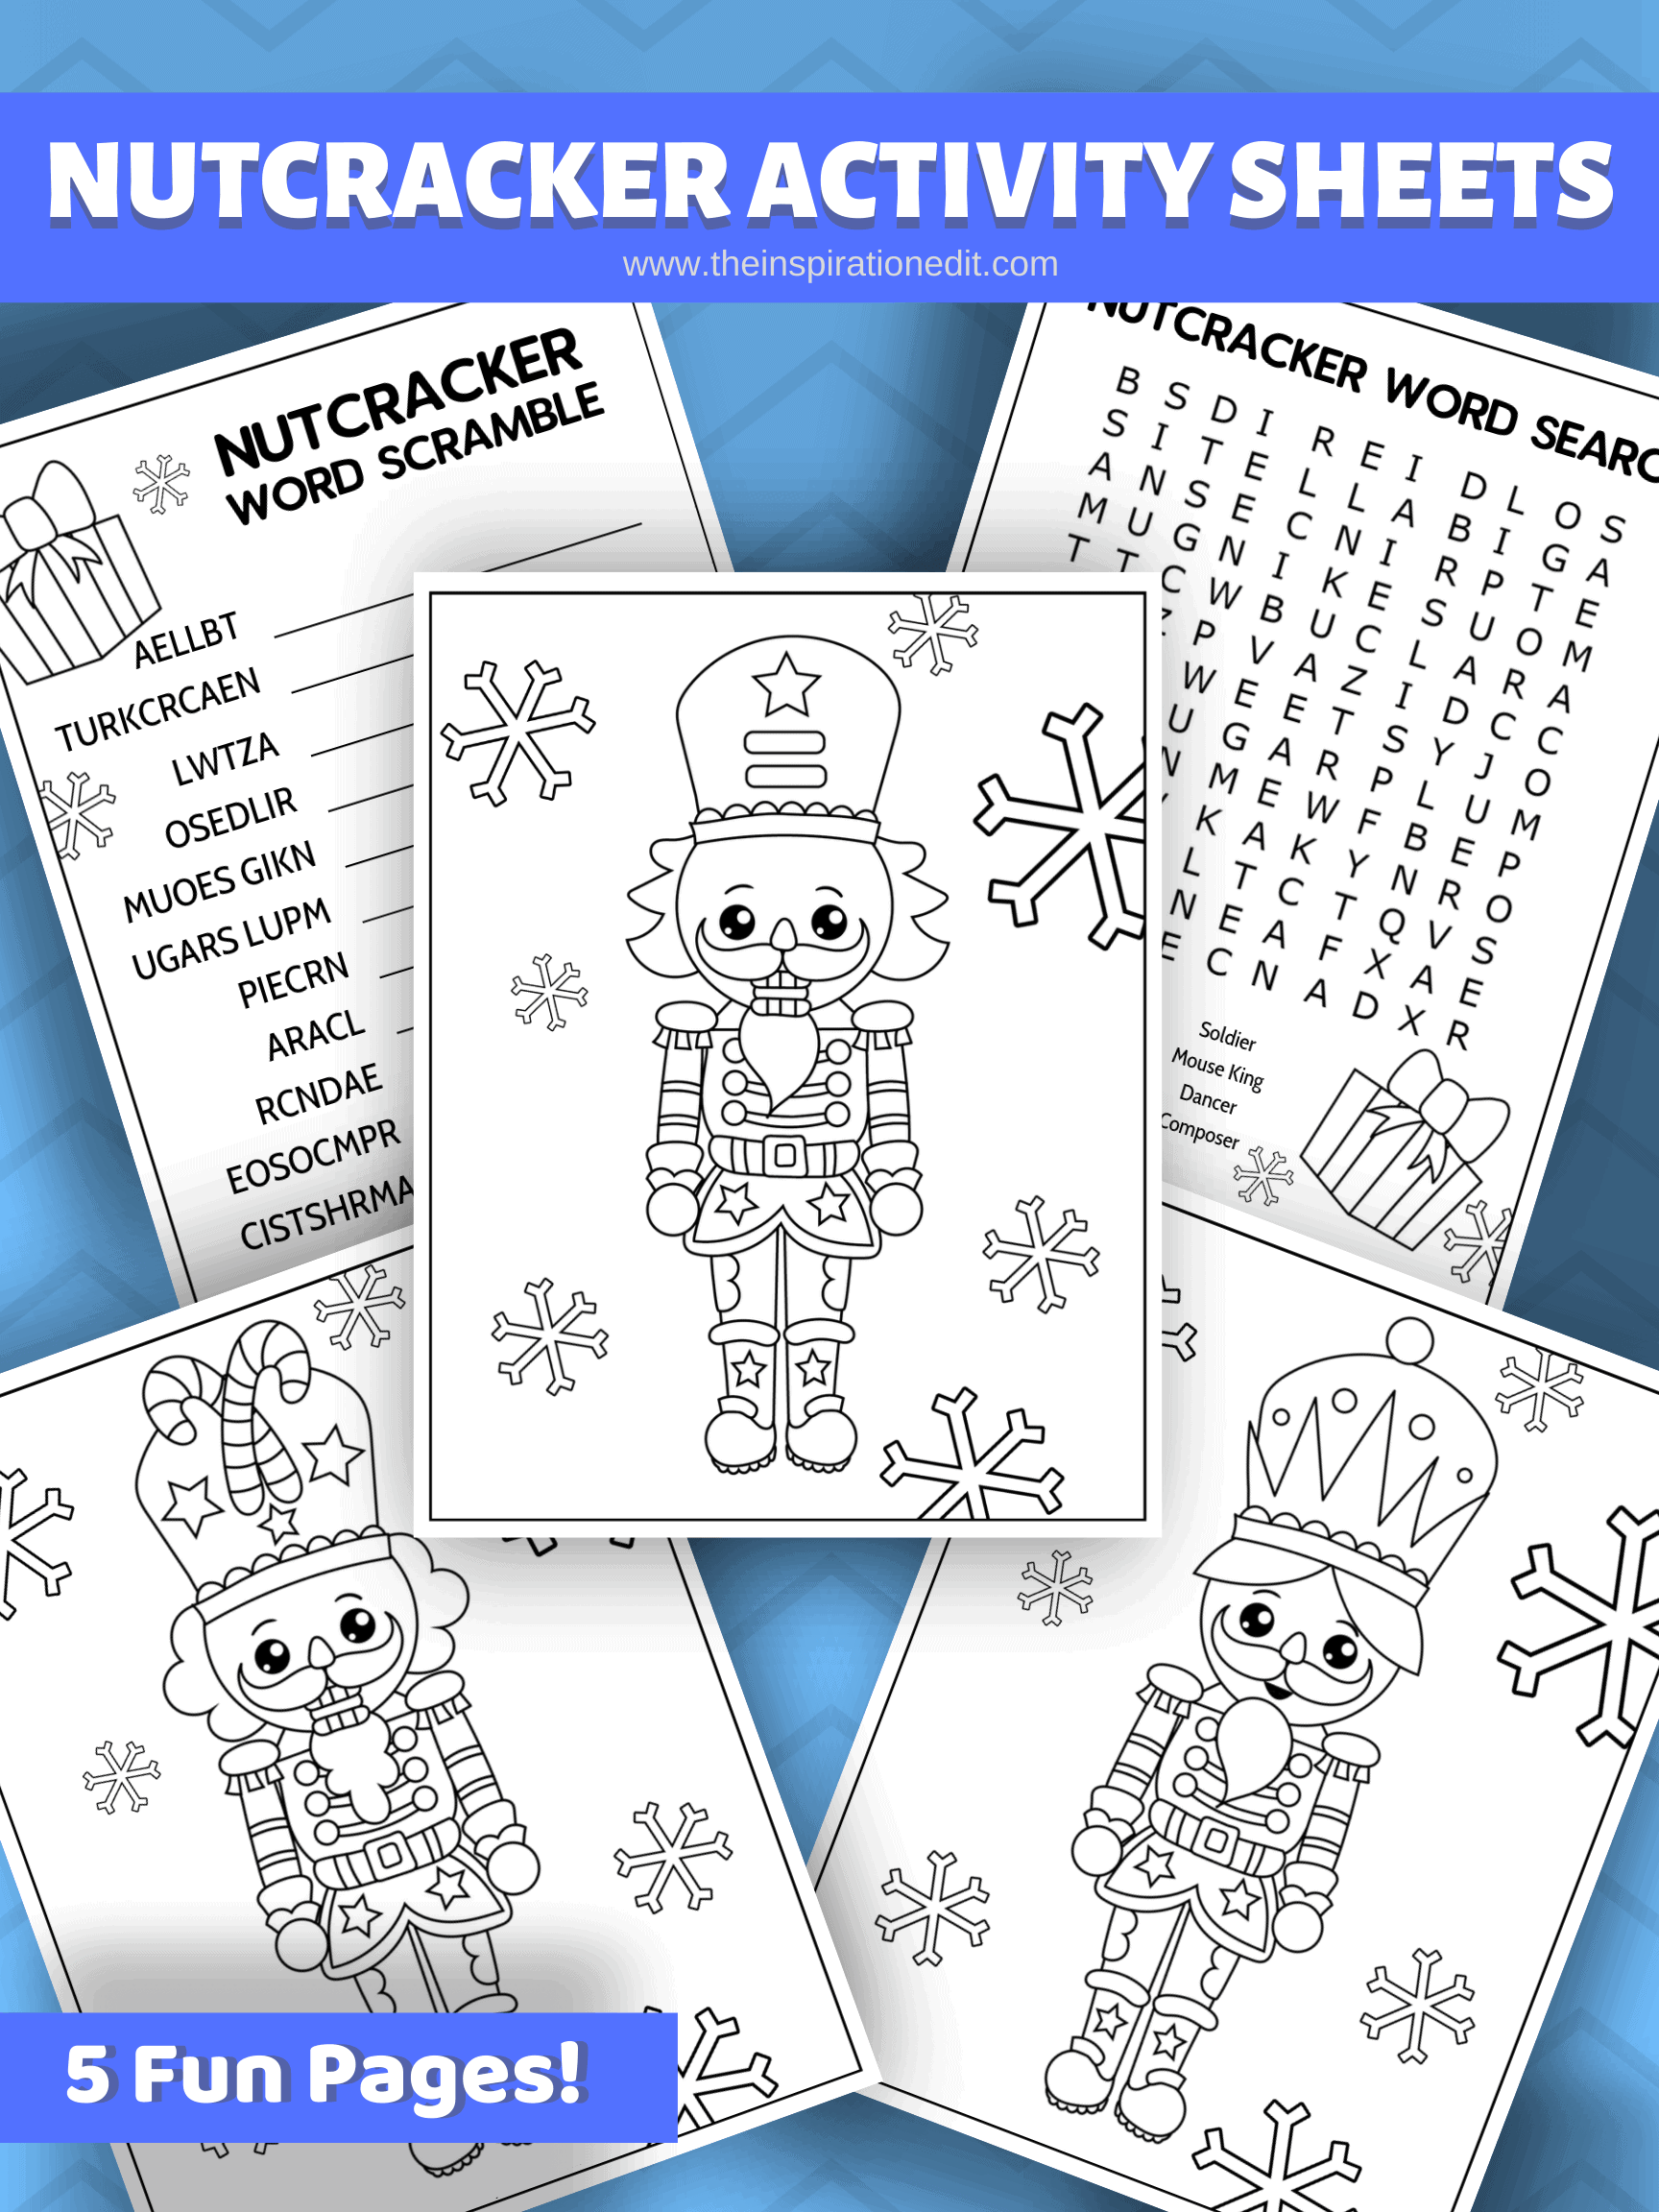 nutcracker-activity-sheets-and-crafts-for-kids-the-inspiration-edit